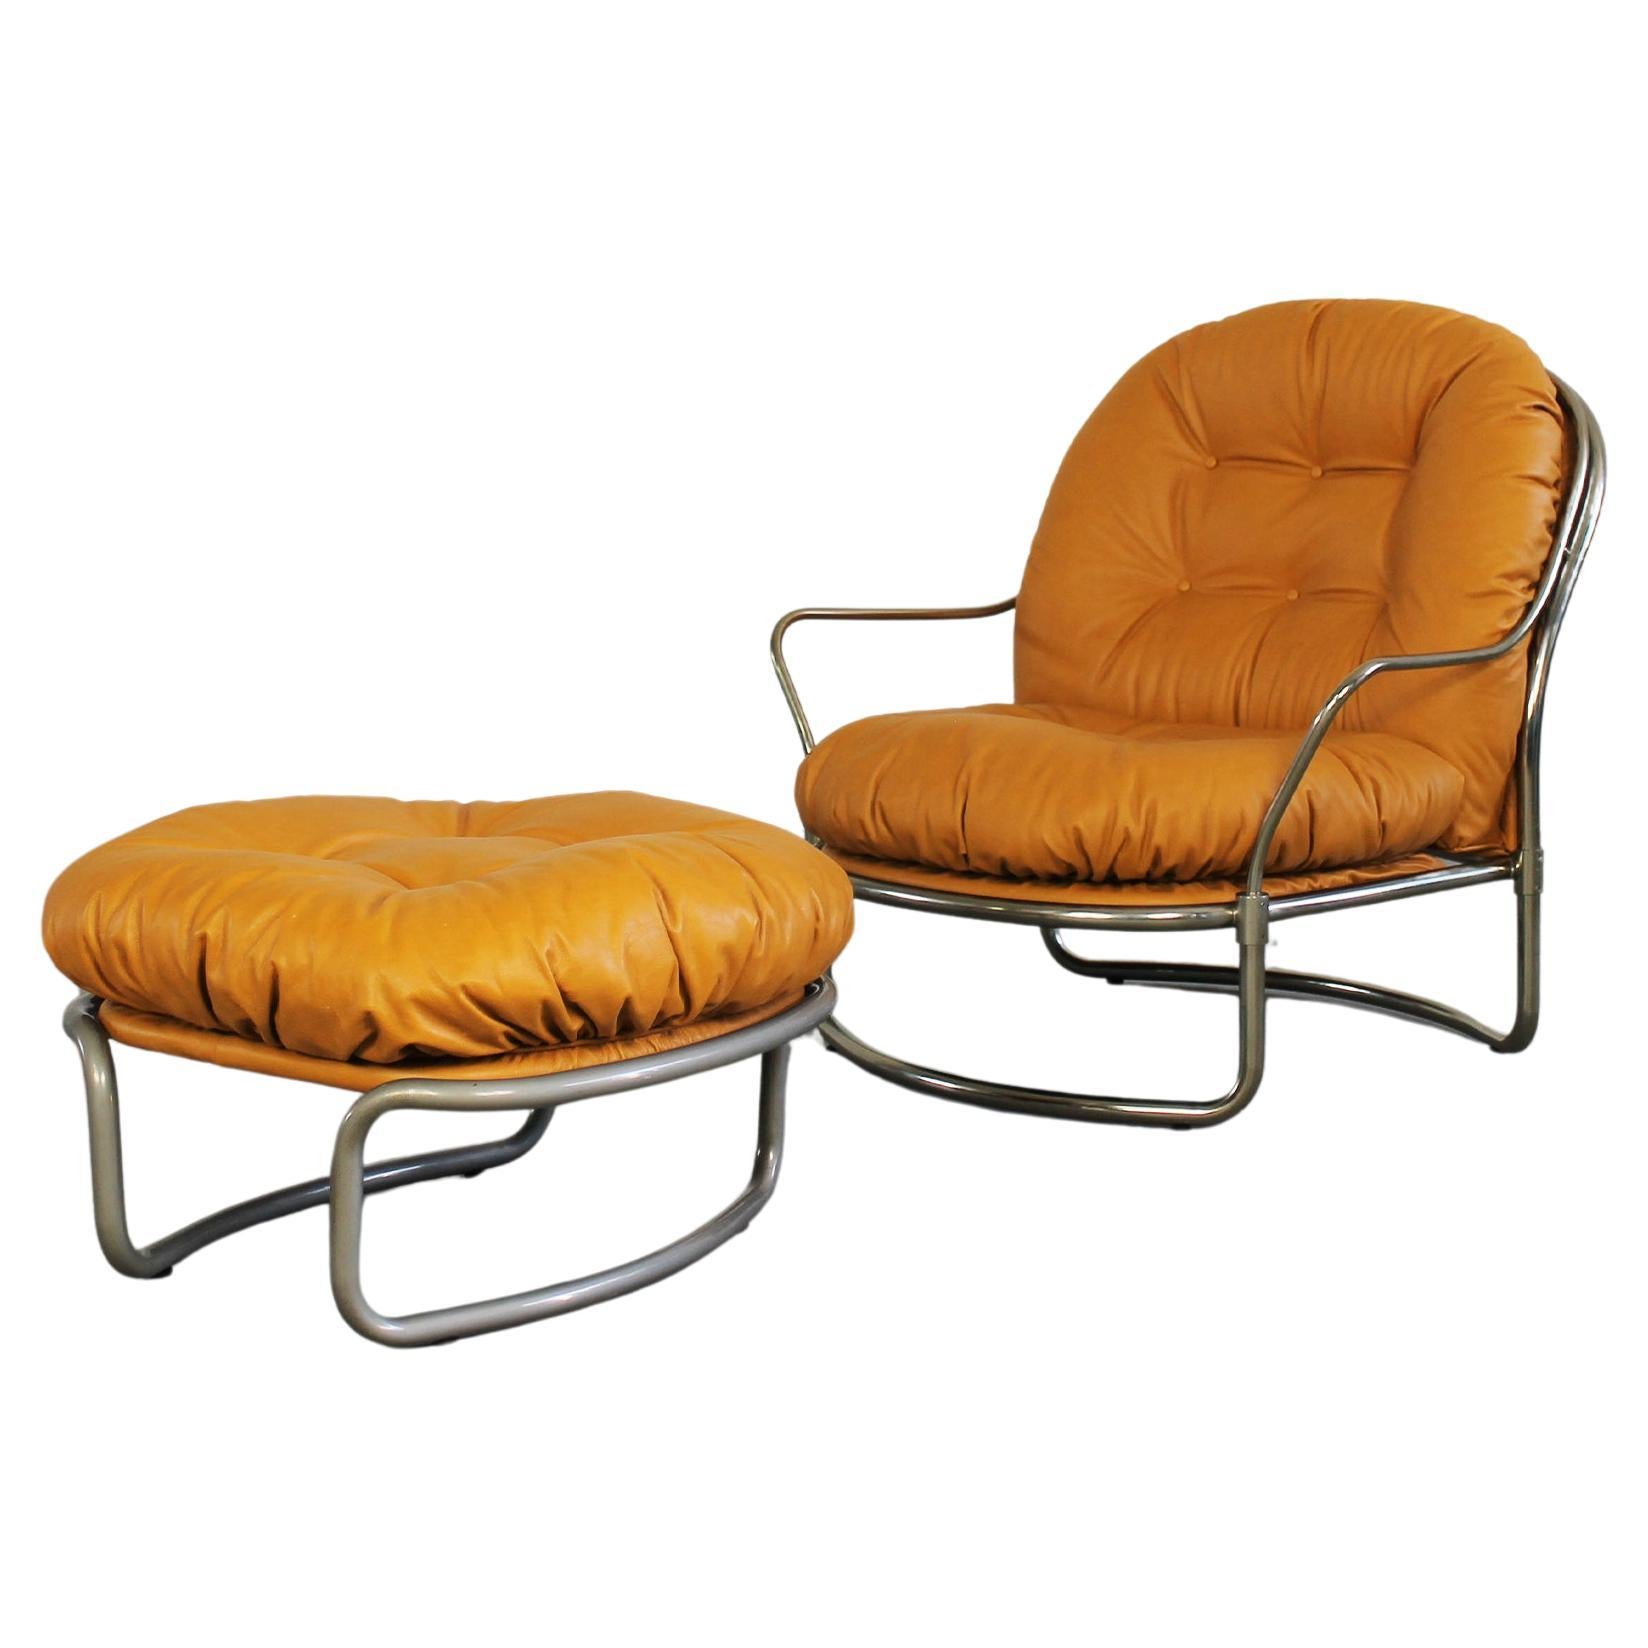 Carlo de Carli 915 Armchair with Footrest in Metal and Leather by Cinova 1970s For Sale